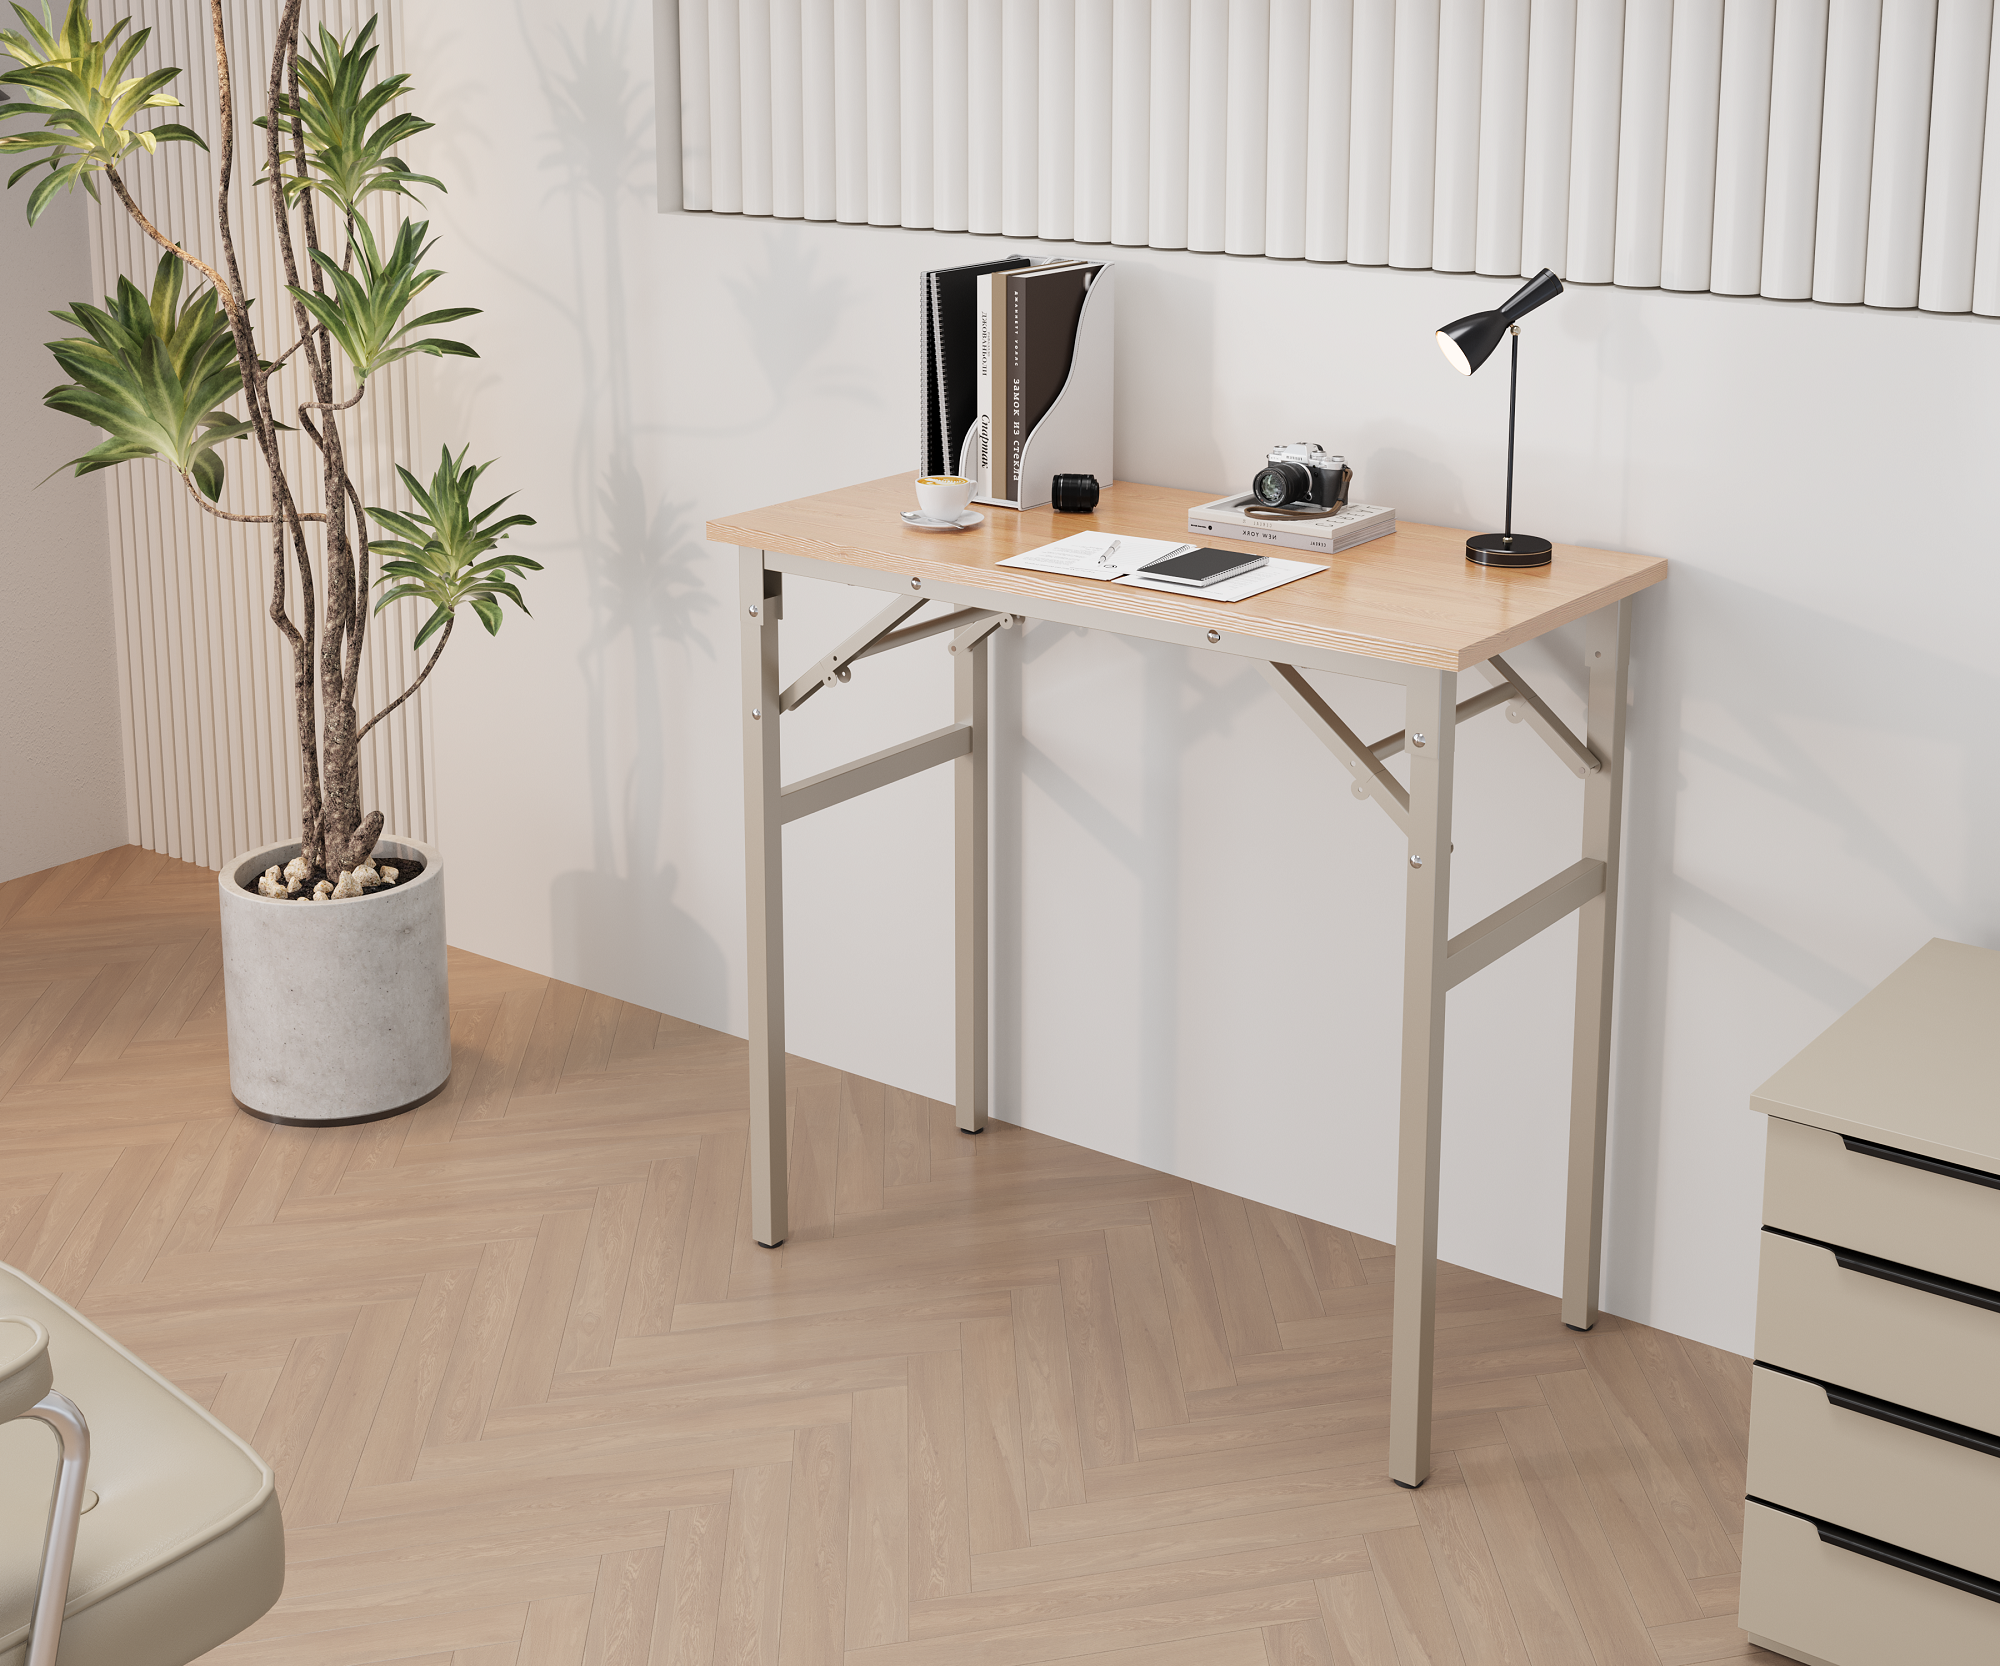 Folding table desk 31.5x15.7 inches computer beige-mdf+steel